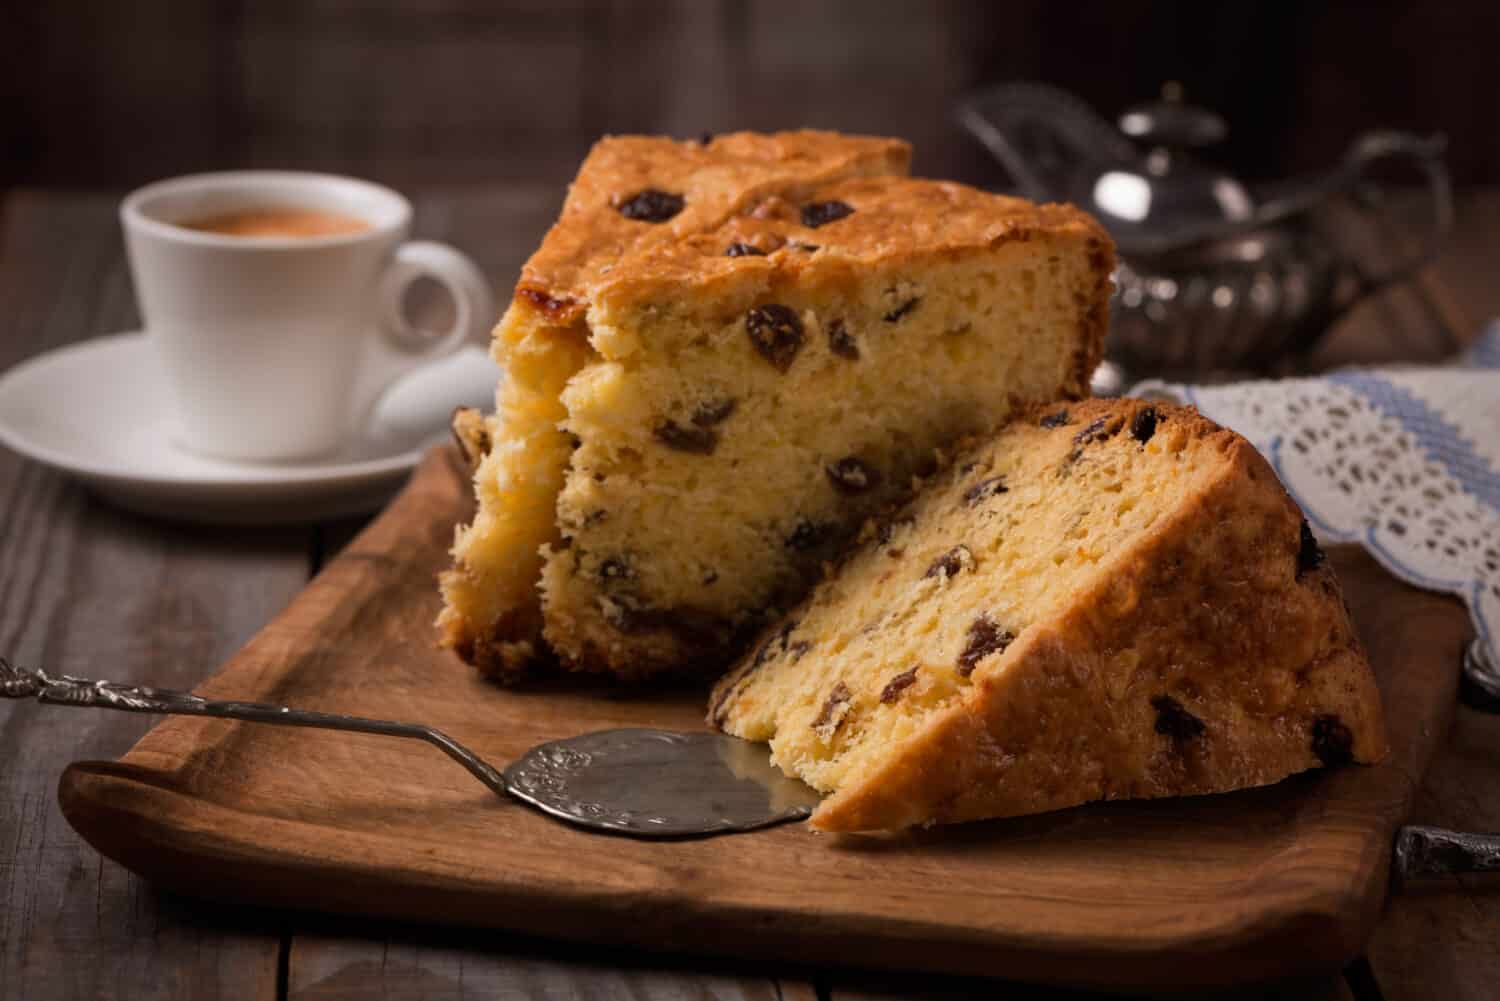 cup of coffee and slices of home made cake with raisins on wooden plate,vintage style